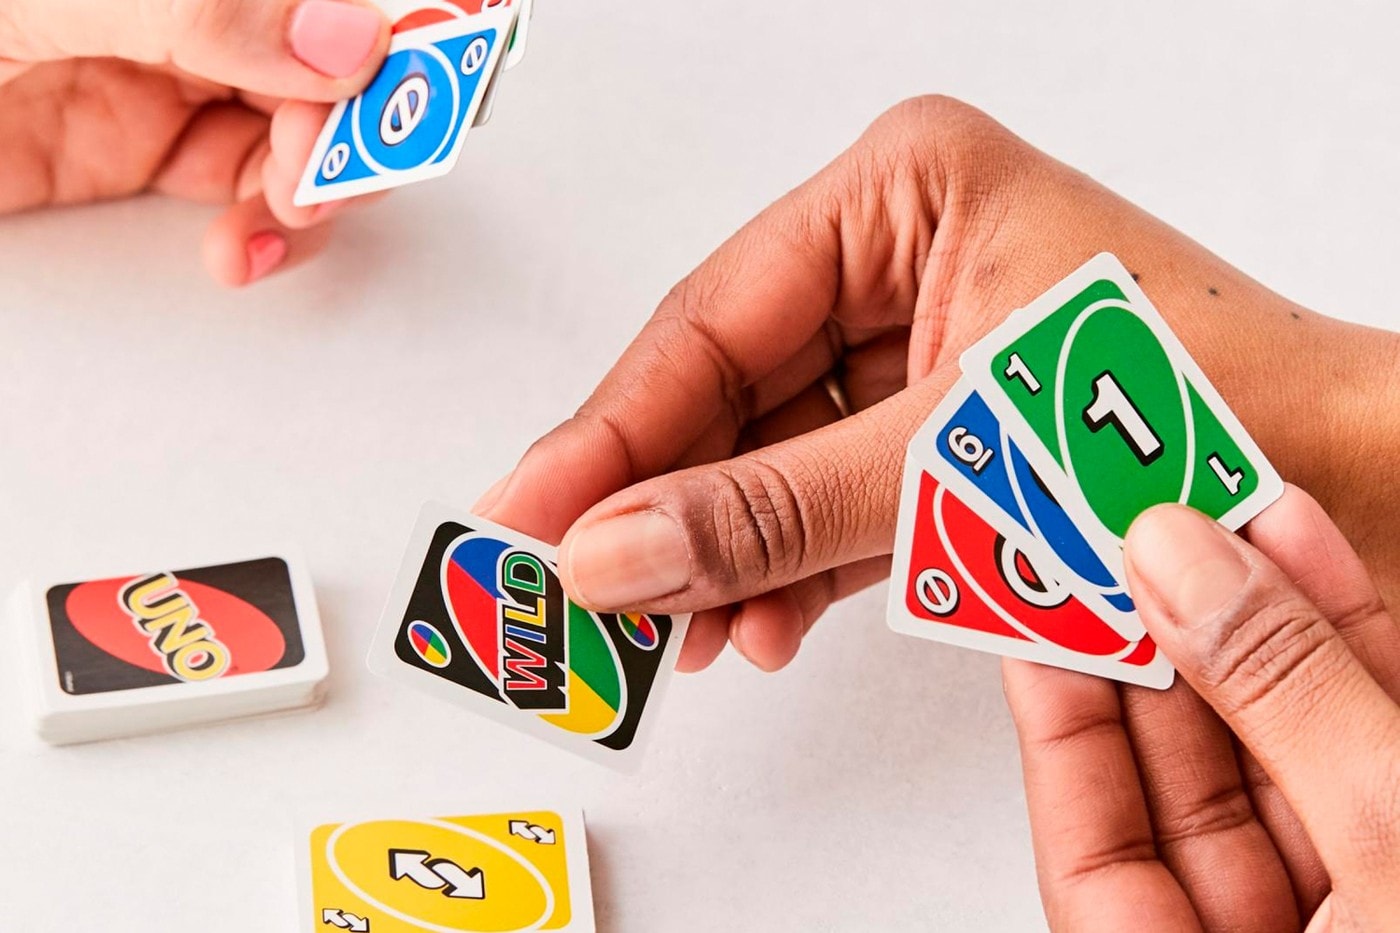 World’s Smallest Uno Card Game